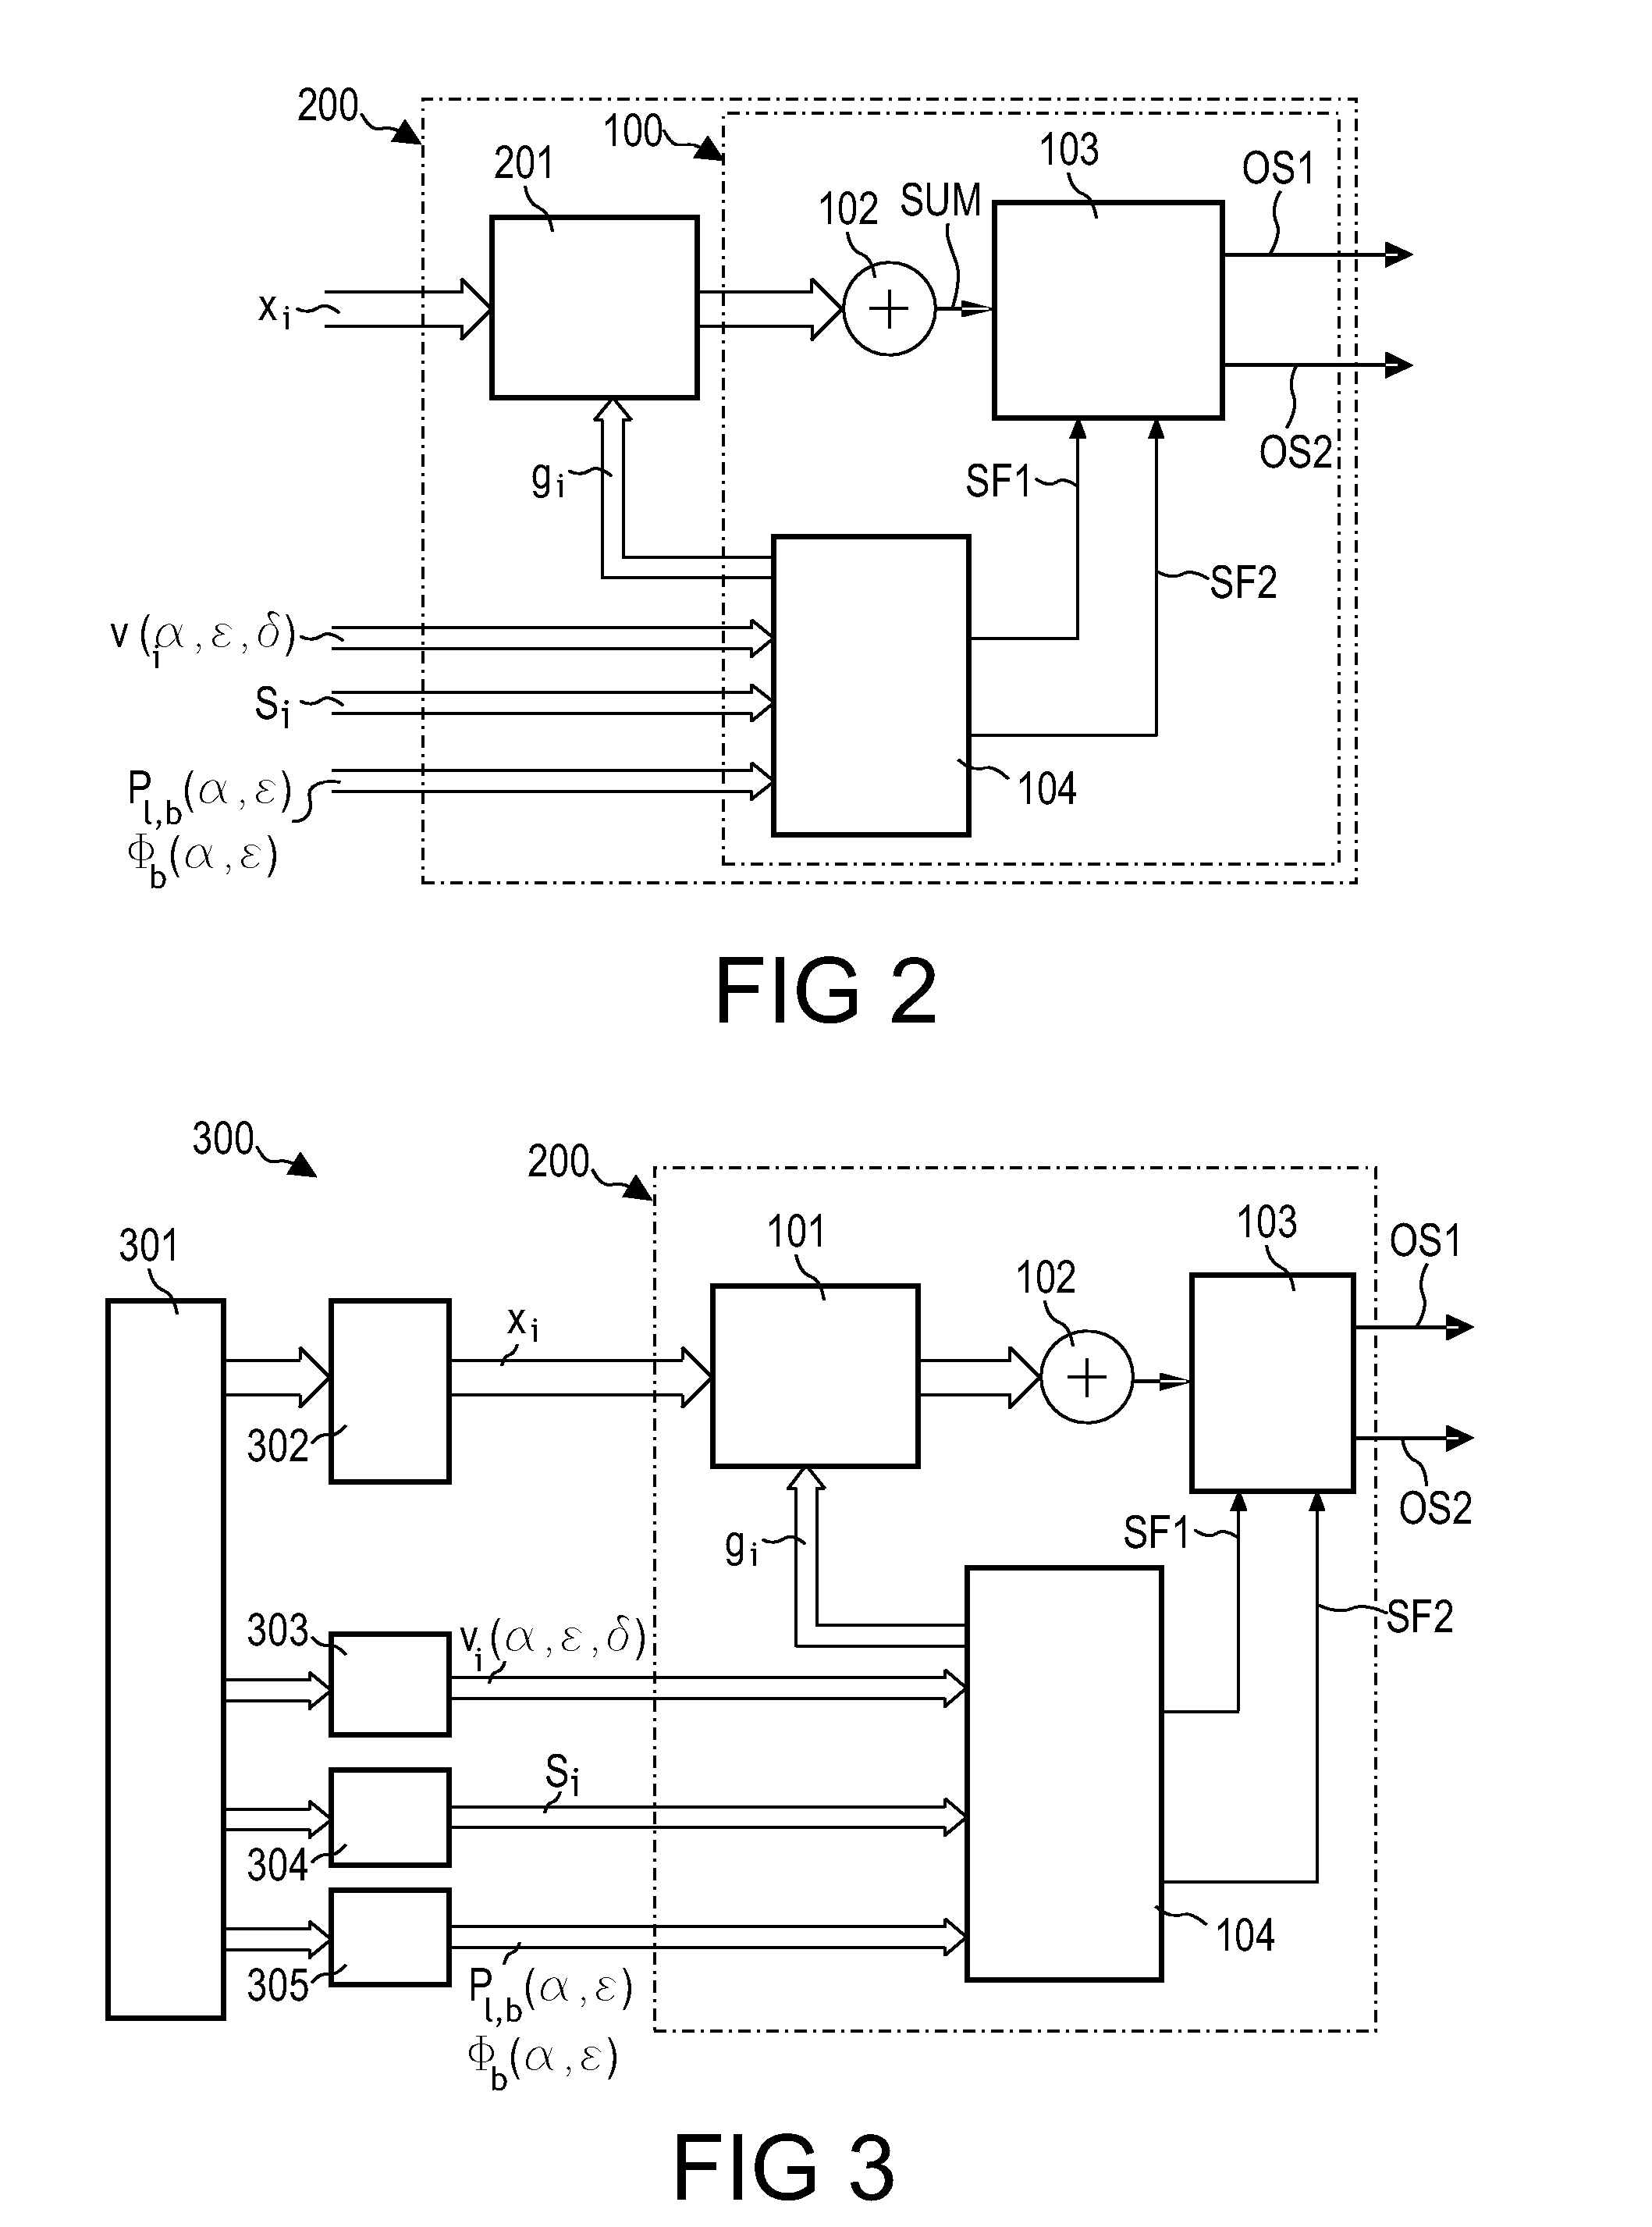 Method of and Device for Generating and Processing Parameters Representing Hrtfs